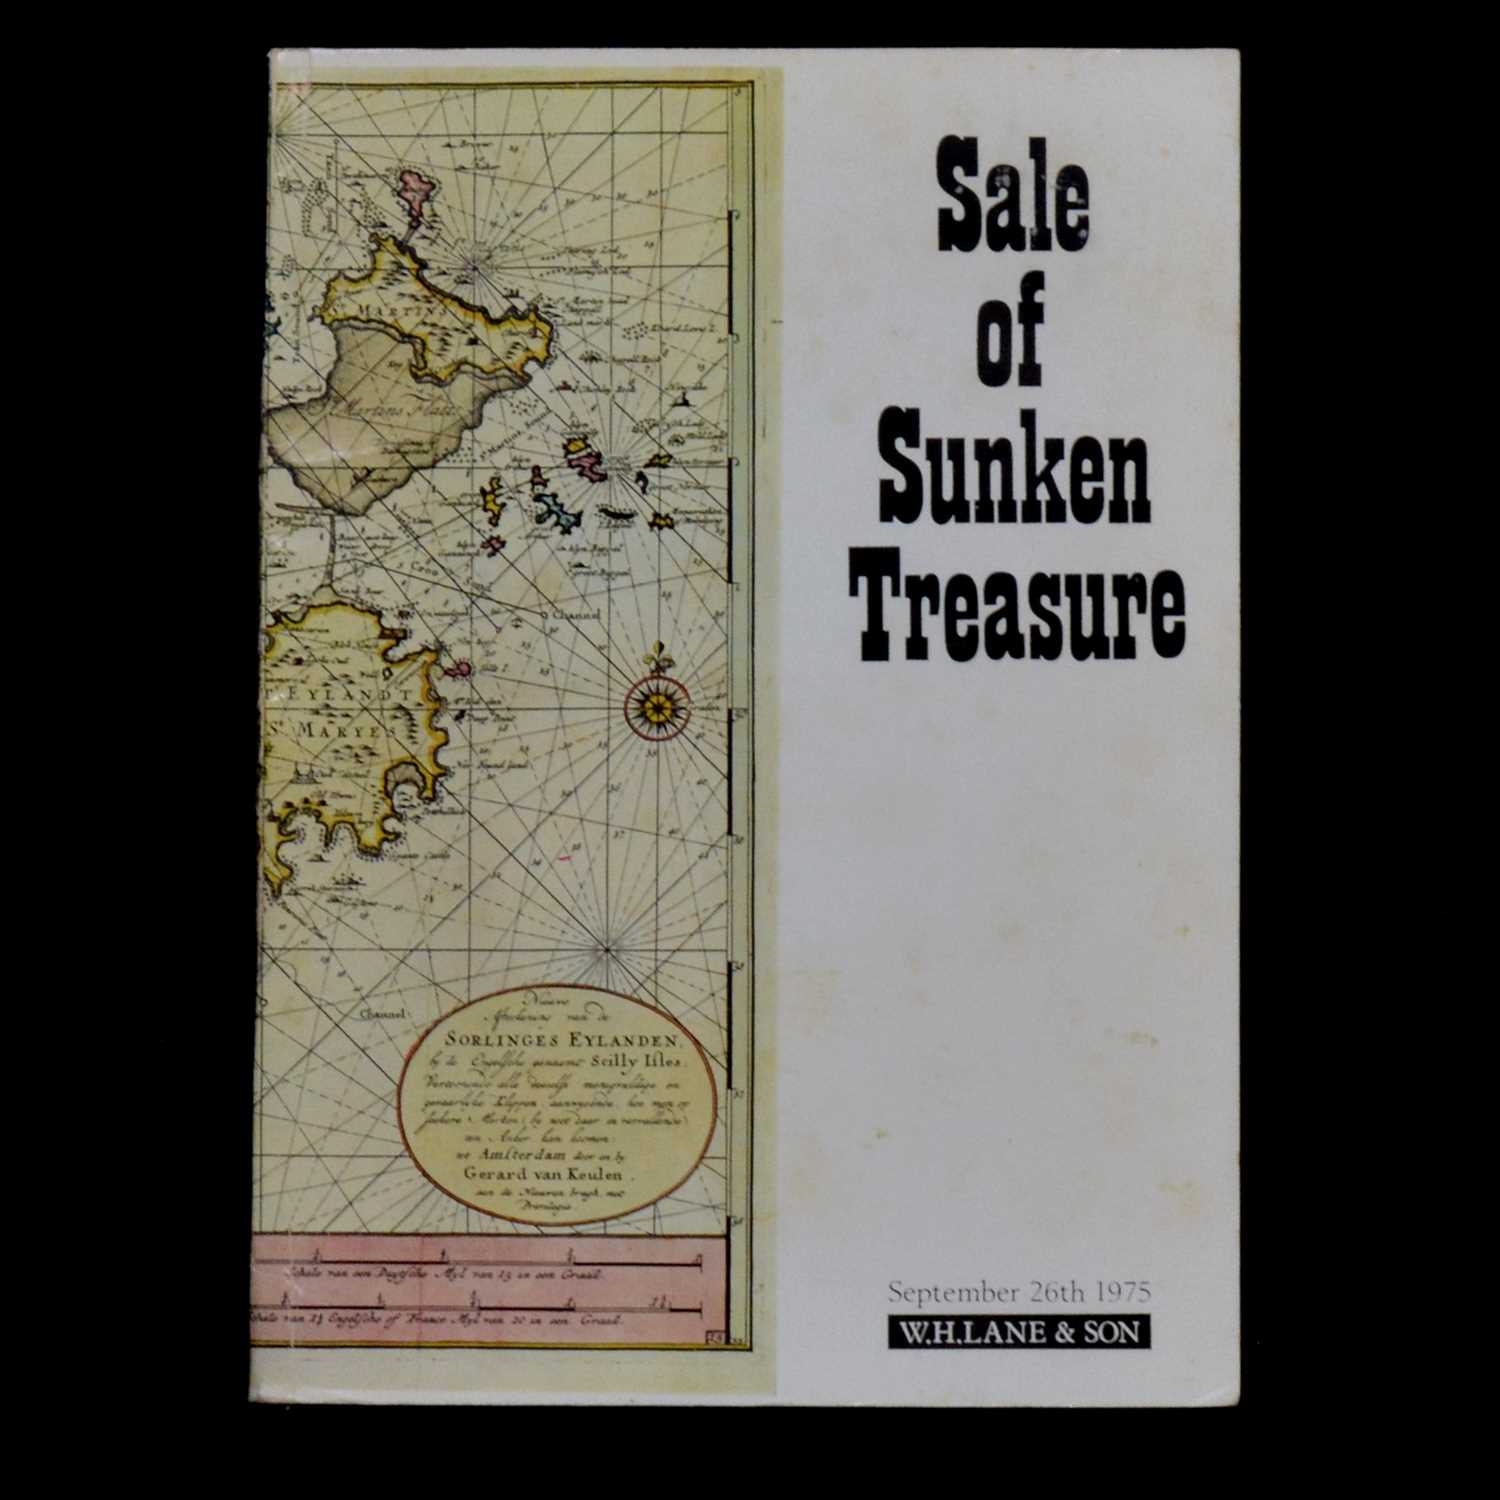 Lot 426 - Auction catalogue from the Sale of Sunken